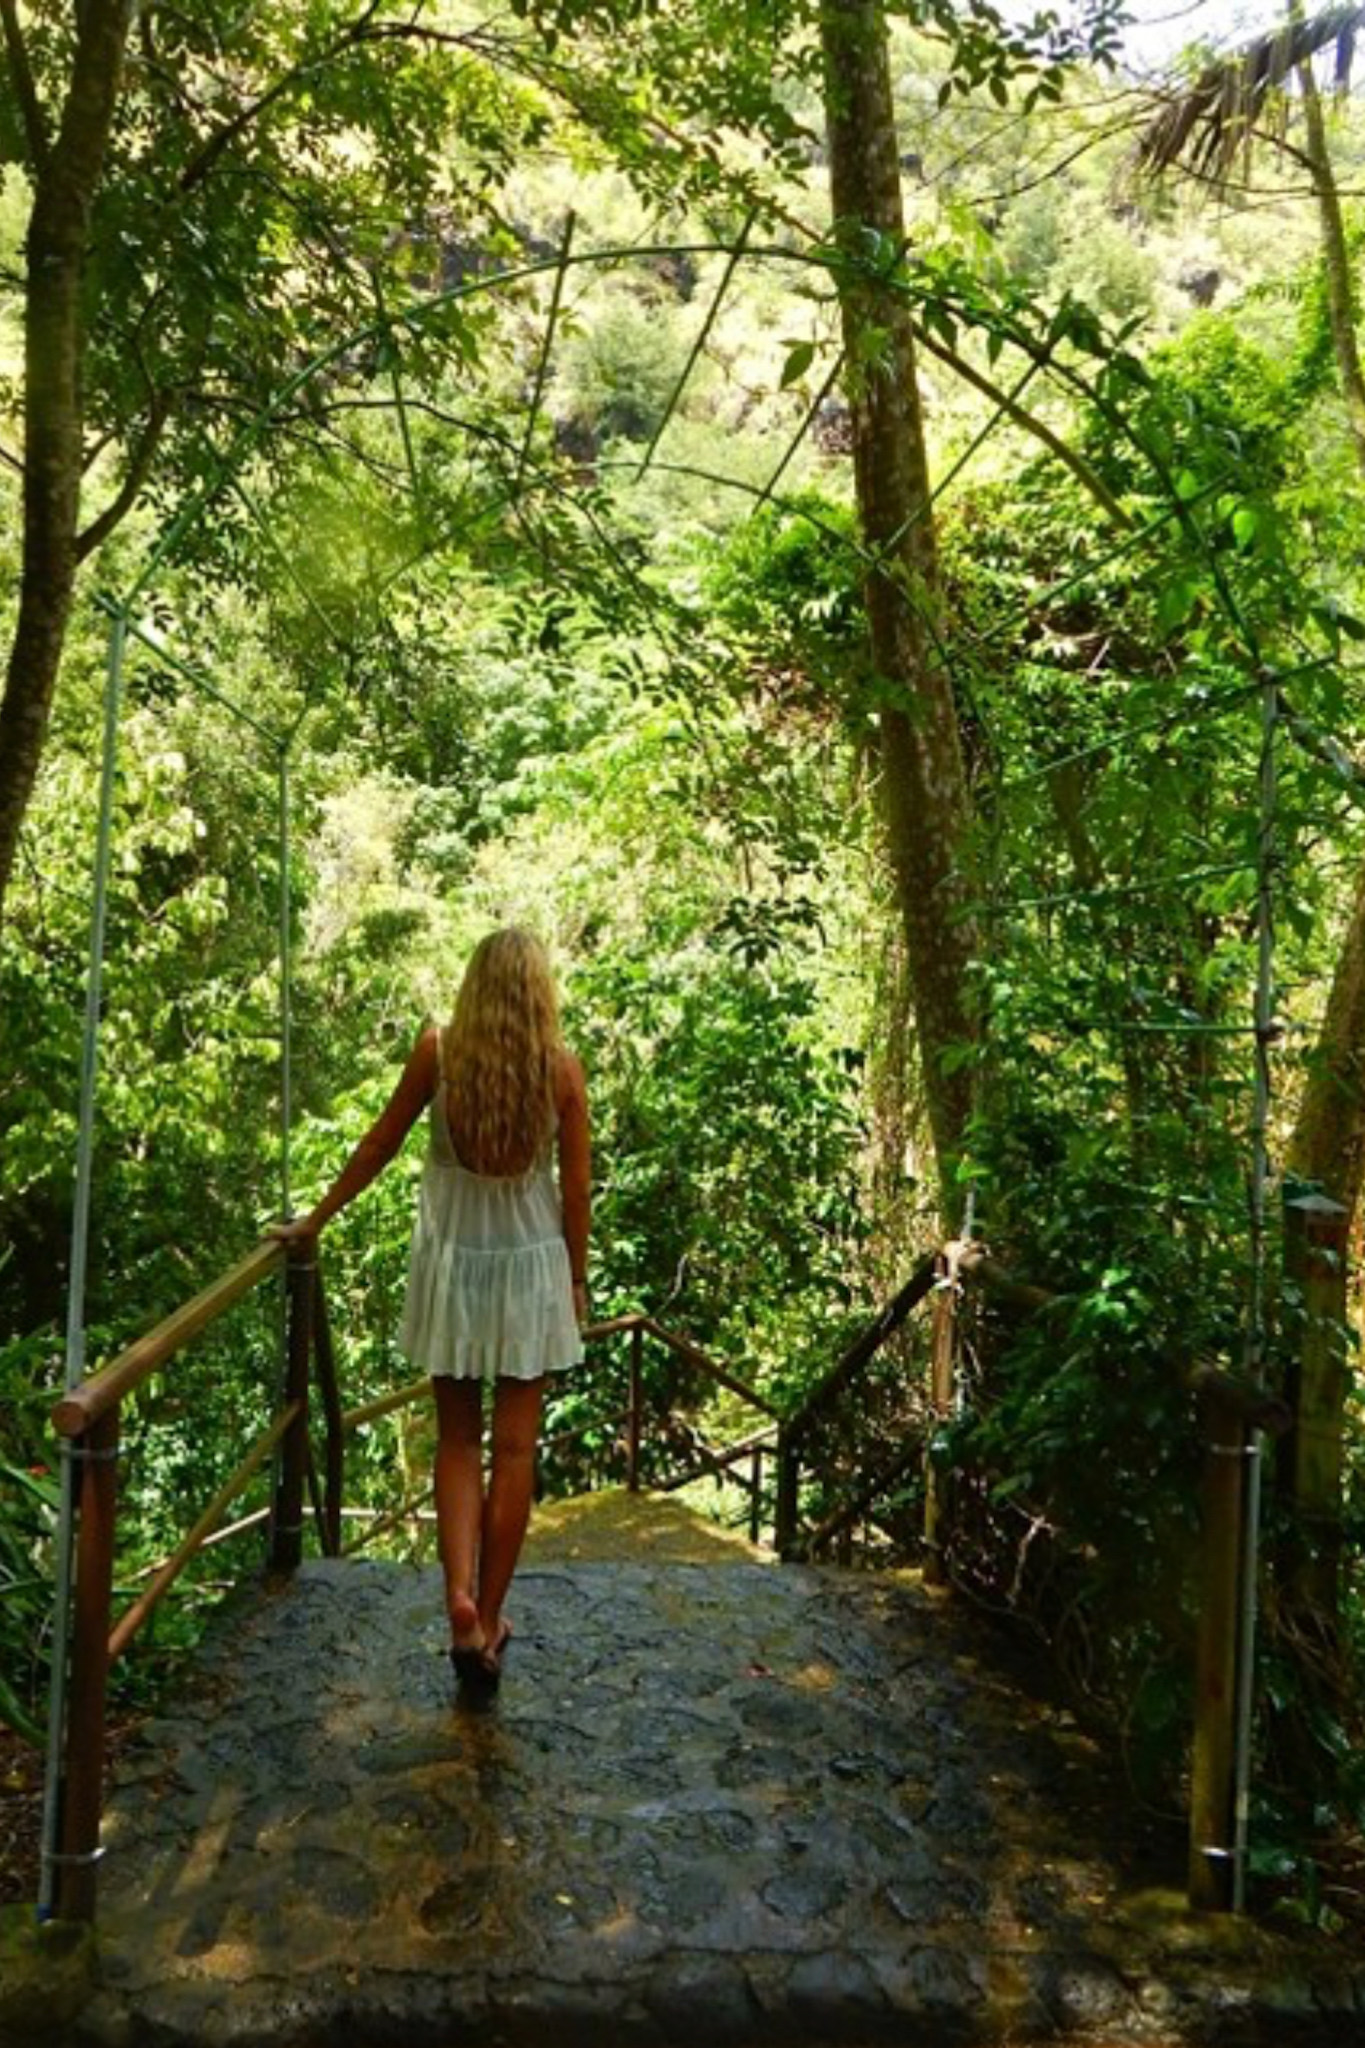 Girl in front of wire garden arch and tropical foliage